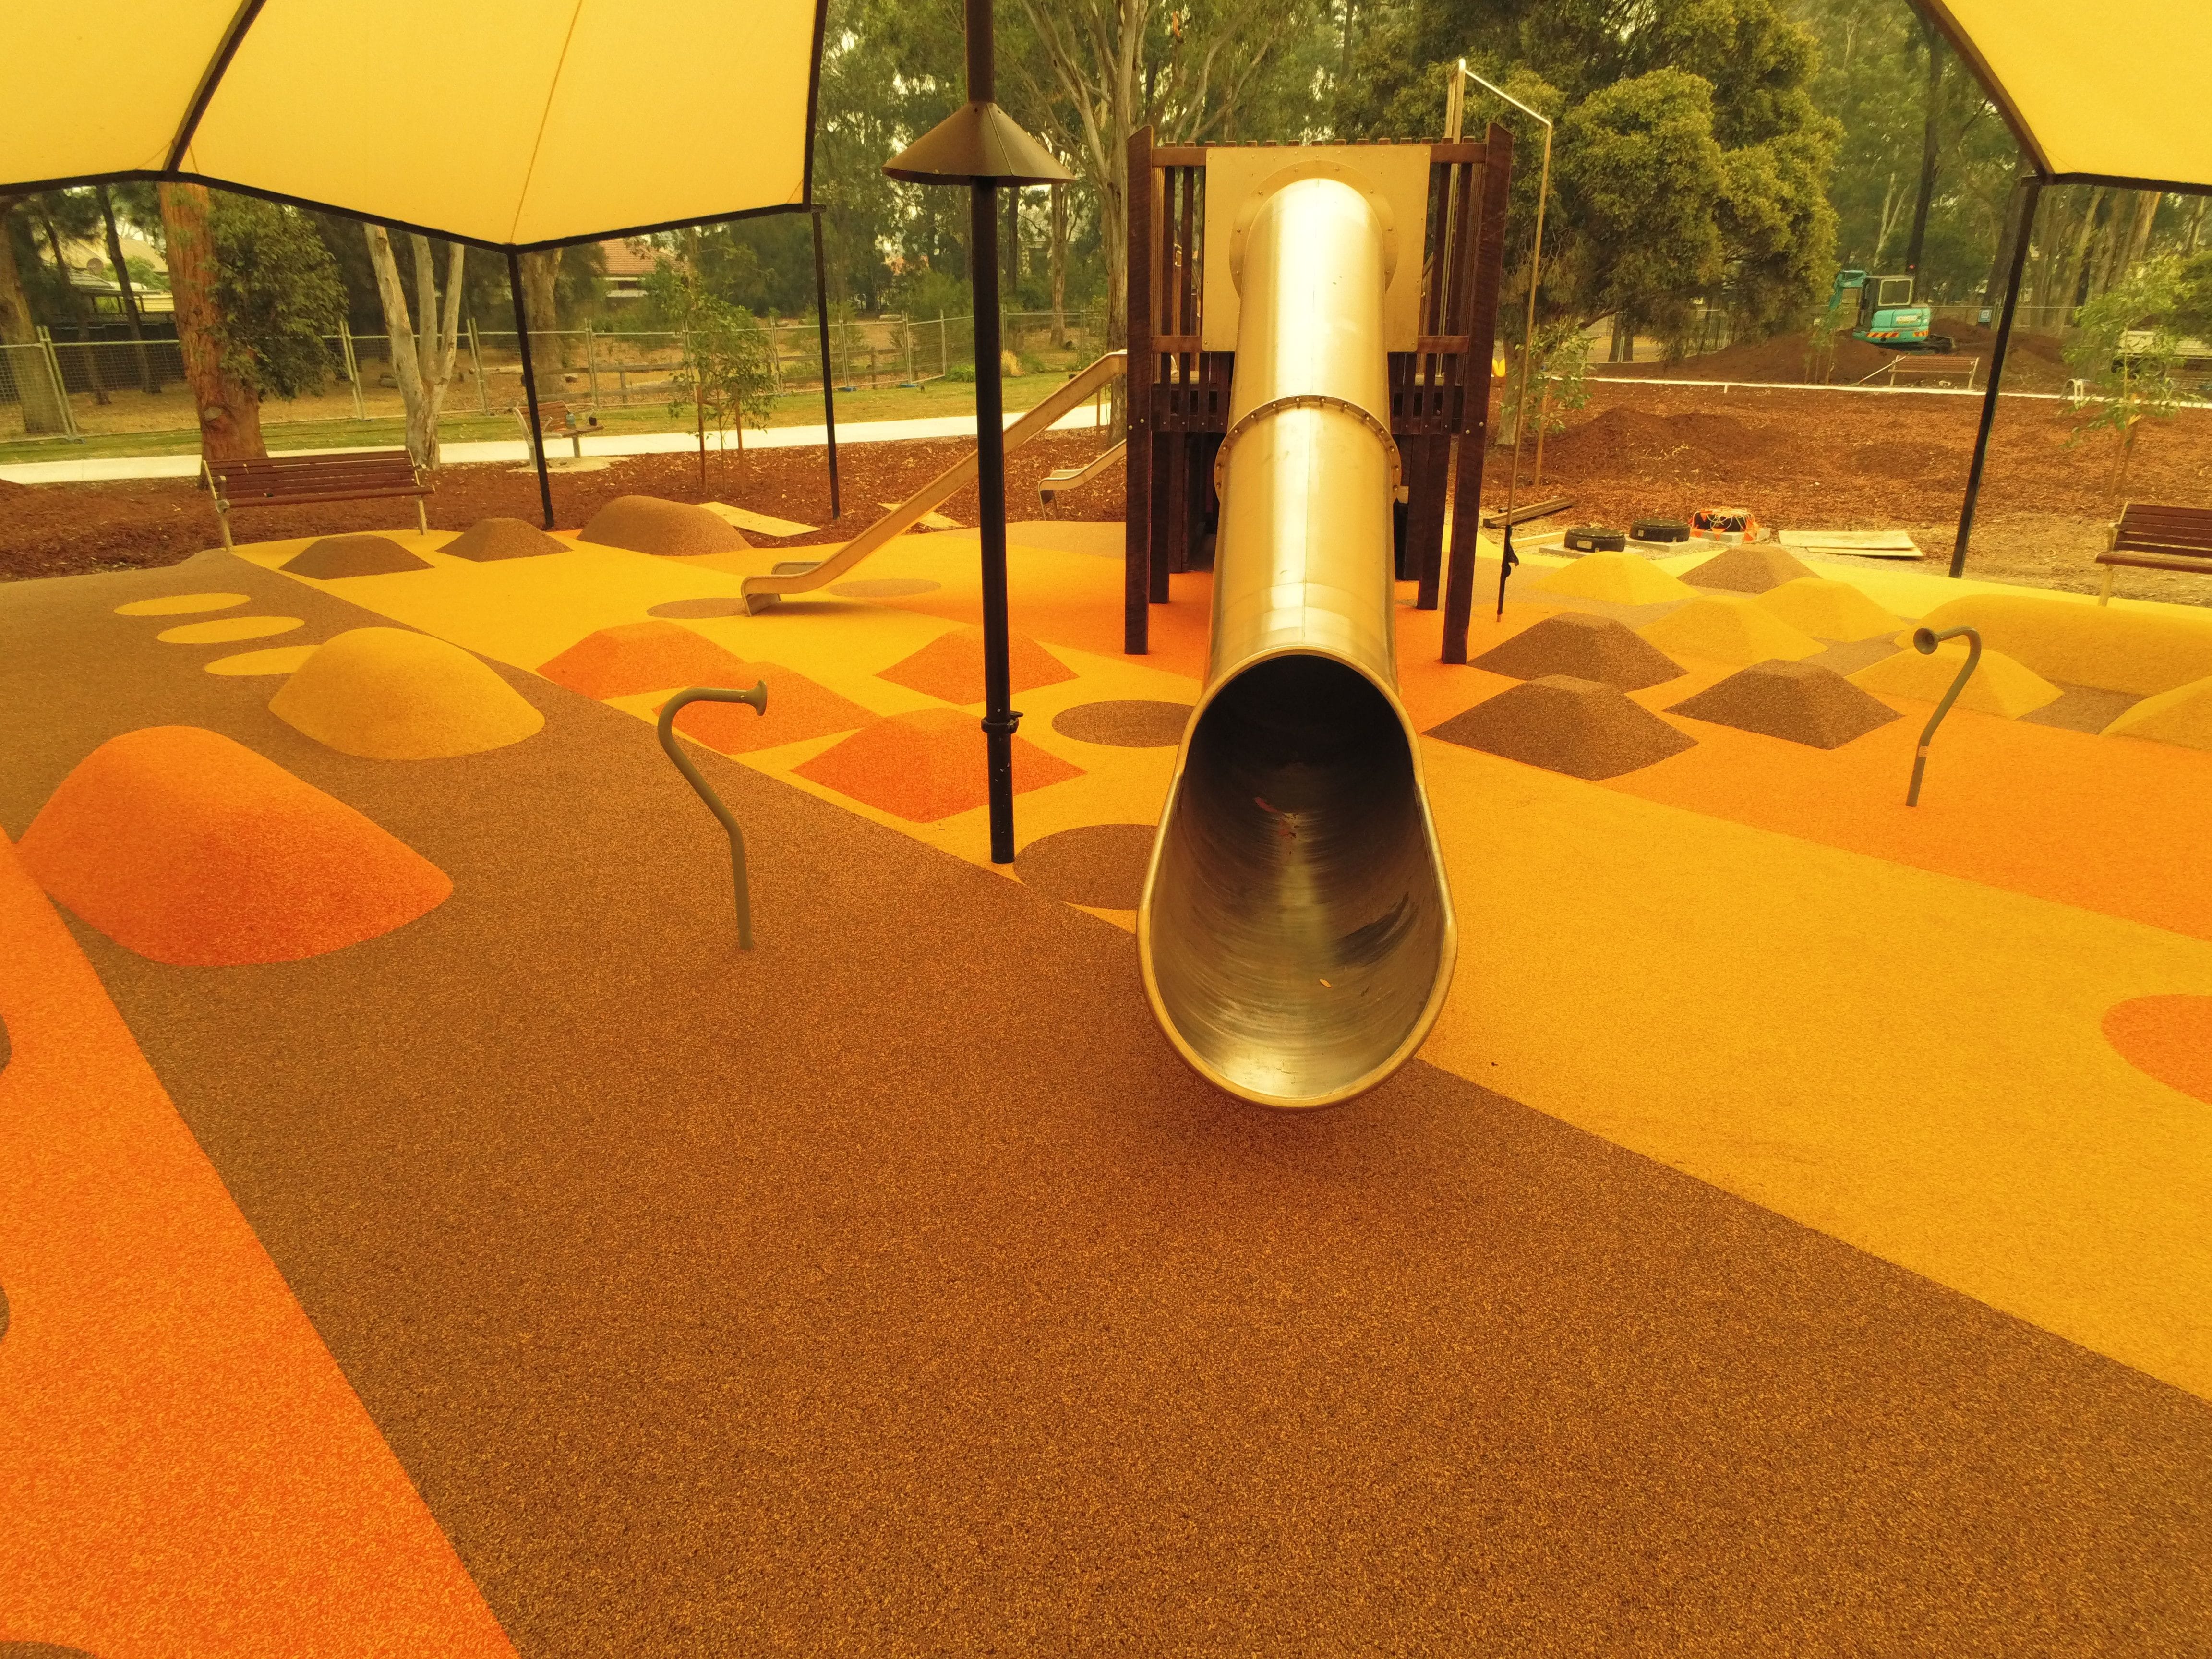 Synthatech Australia - Central Gardens All Ability Playground Image -5e1d2d582bbe8